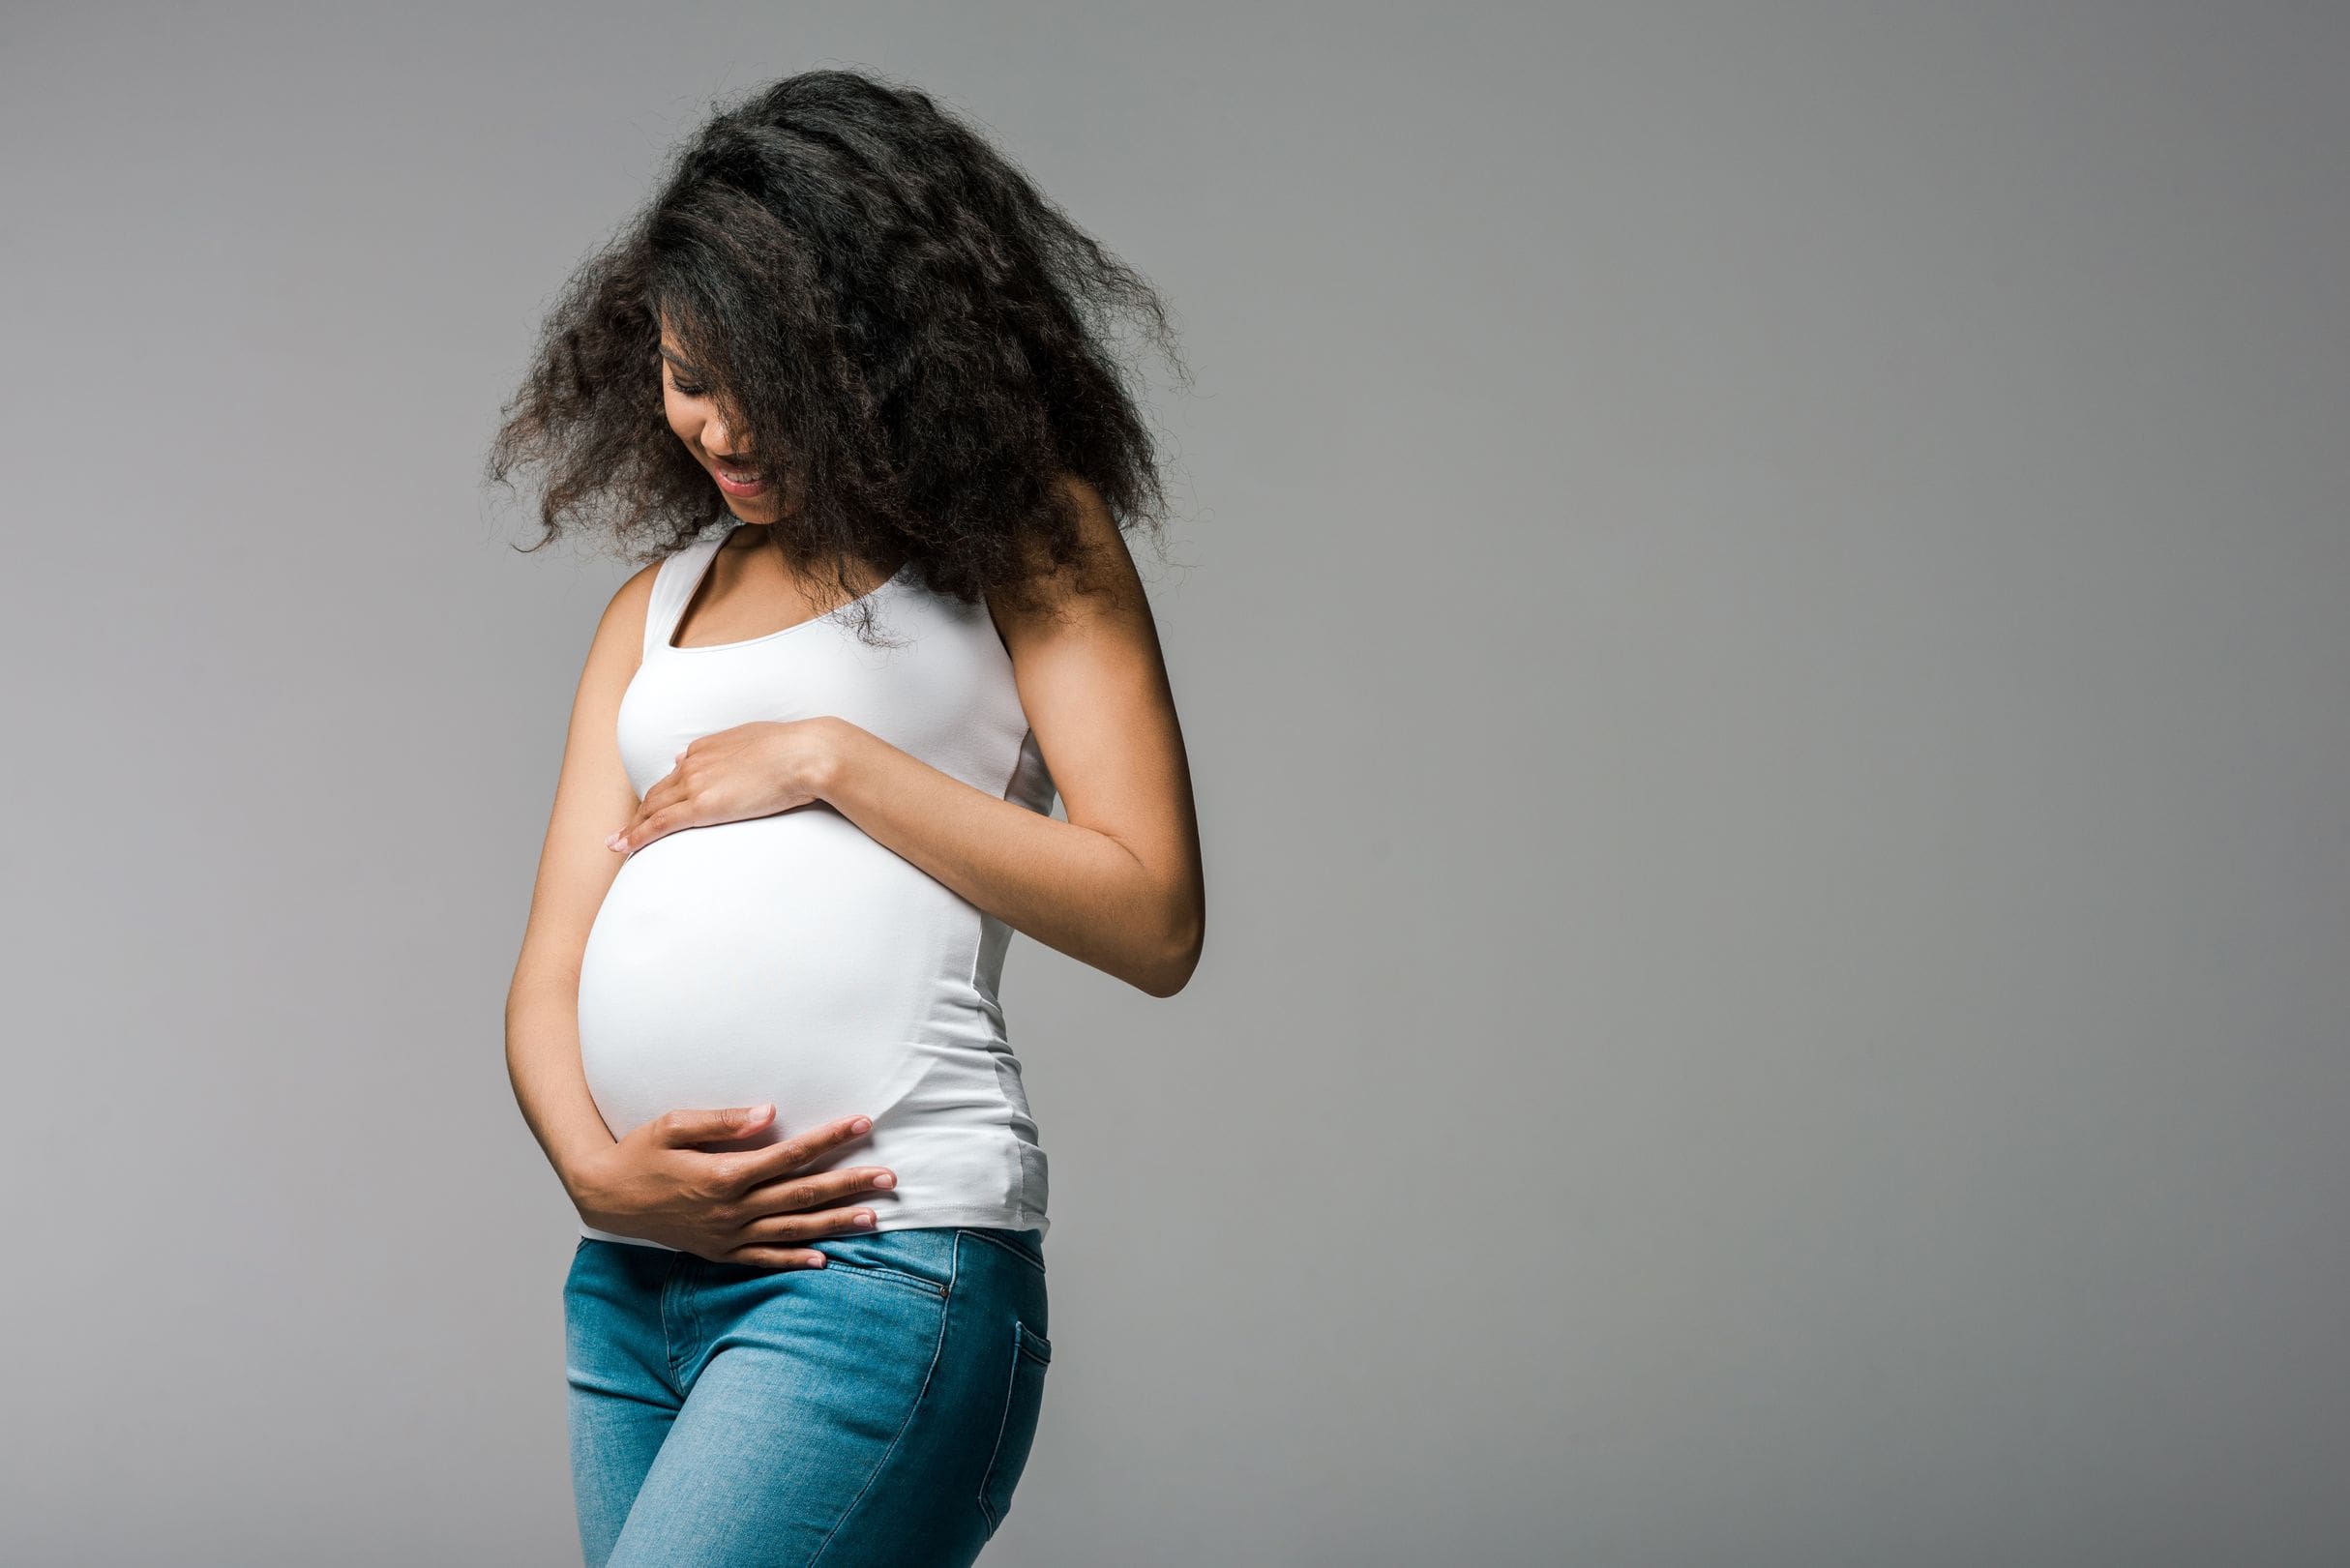 Is there a risk to pregnant women?